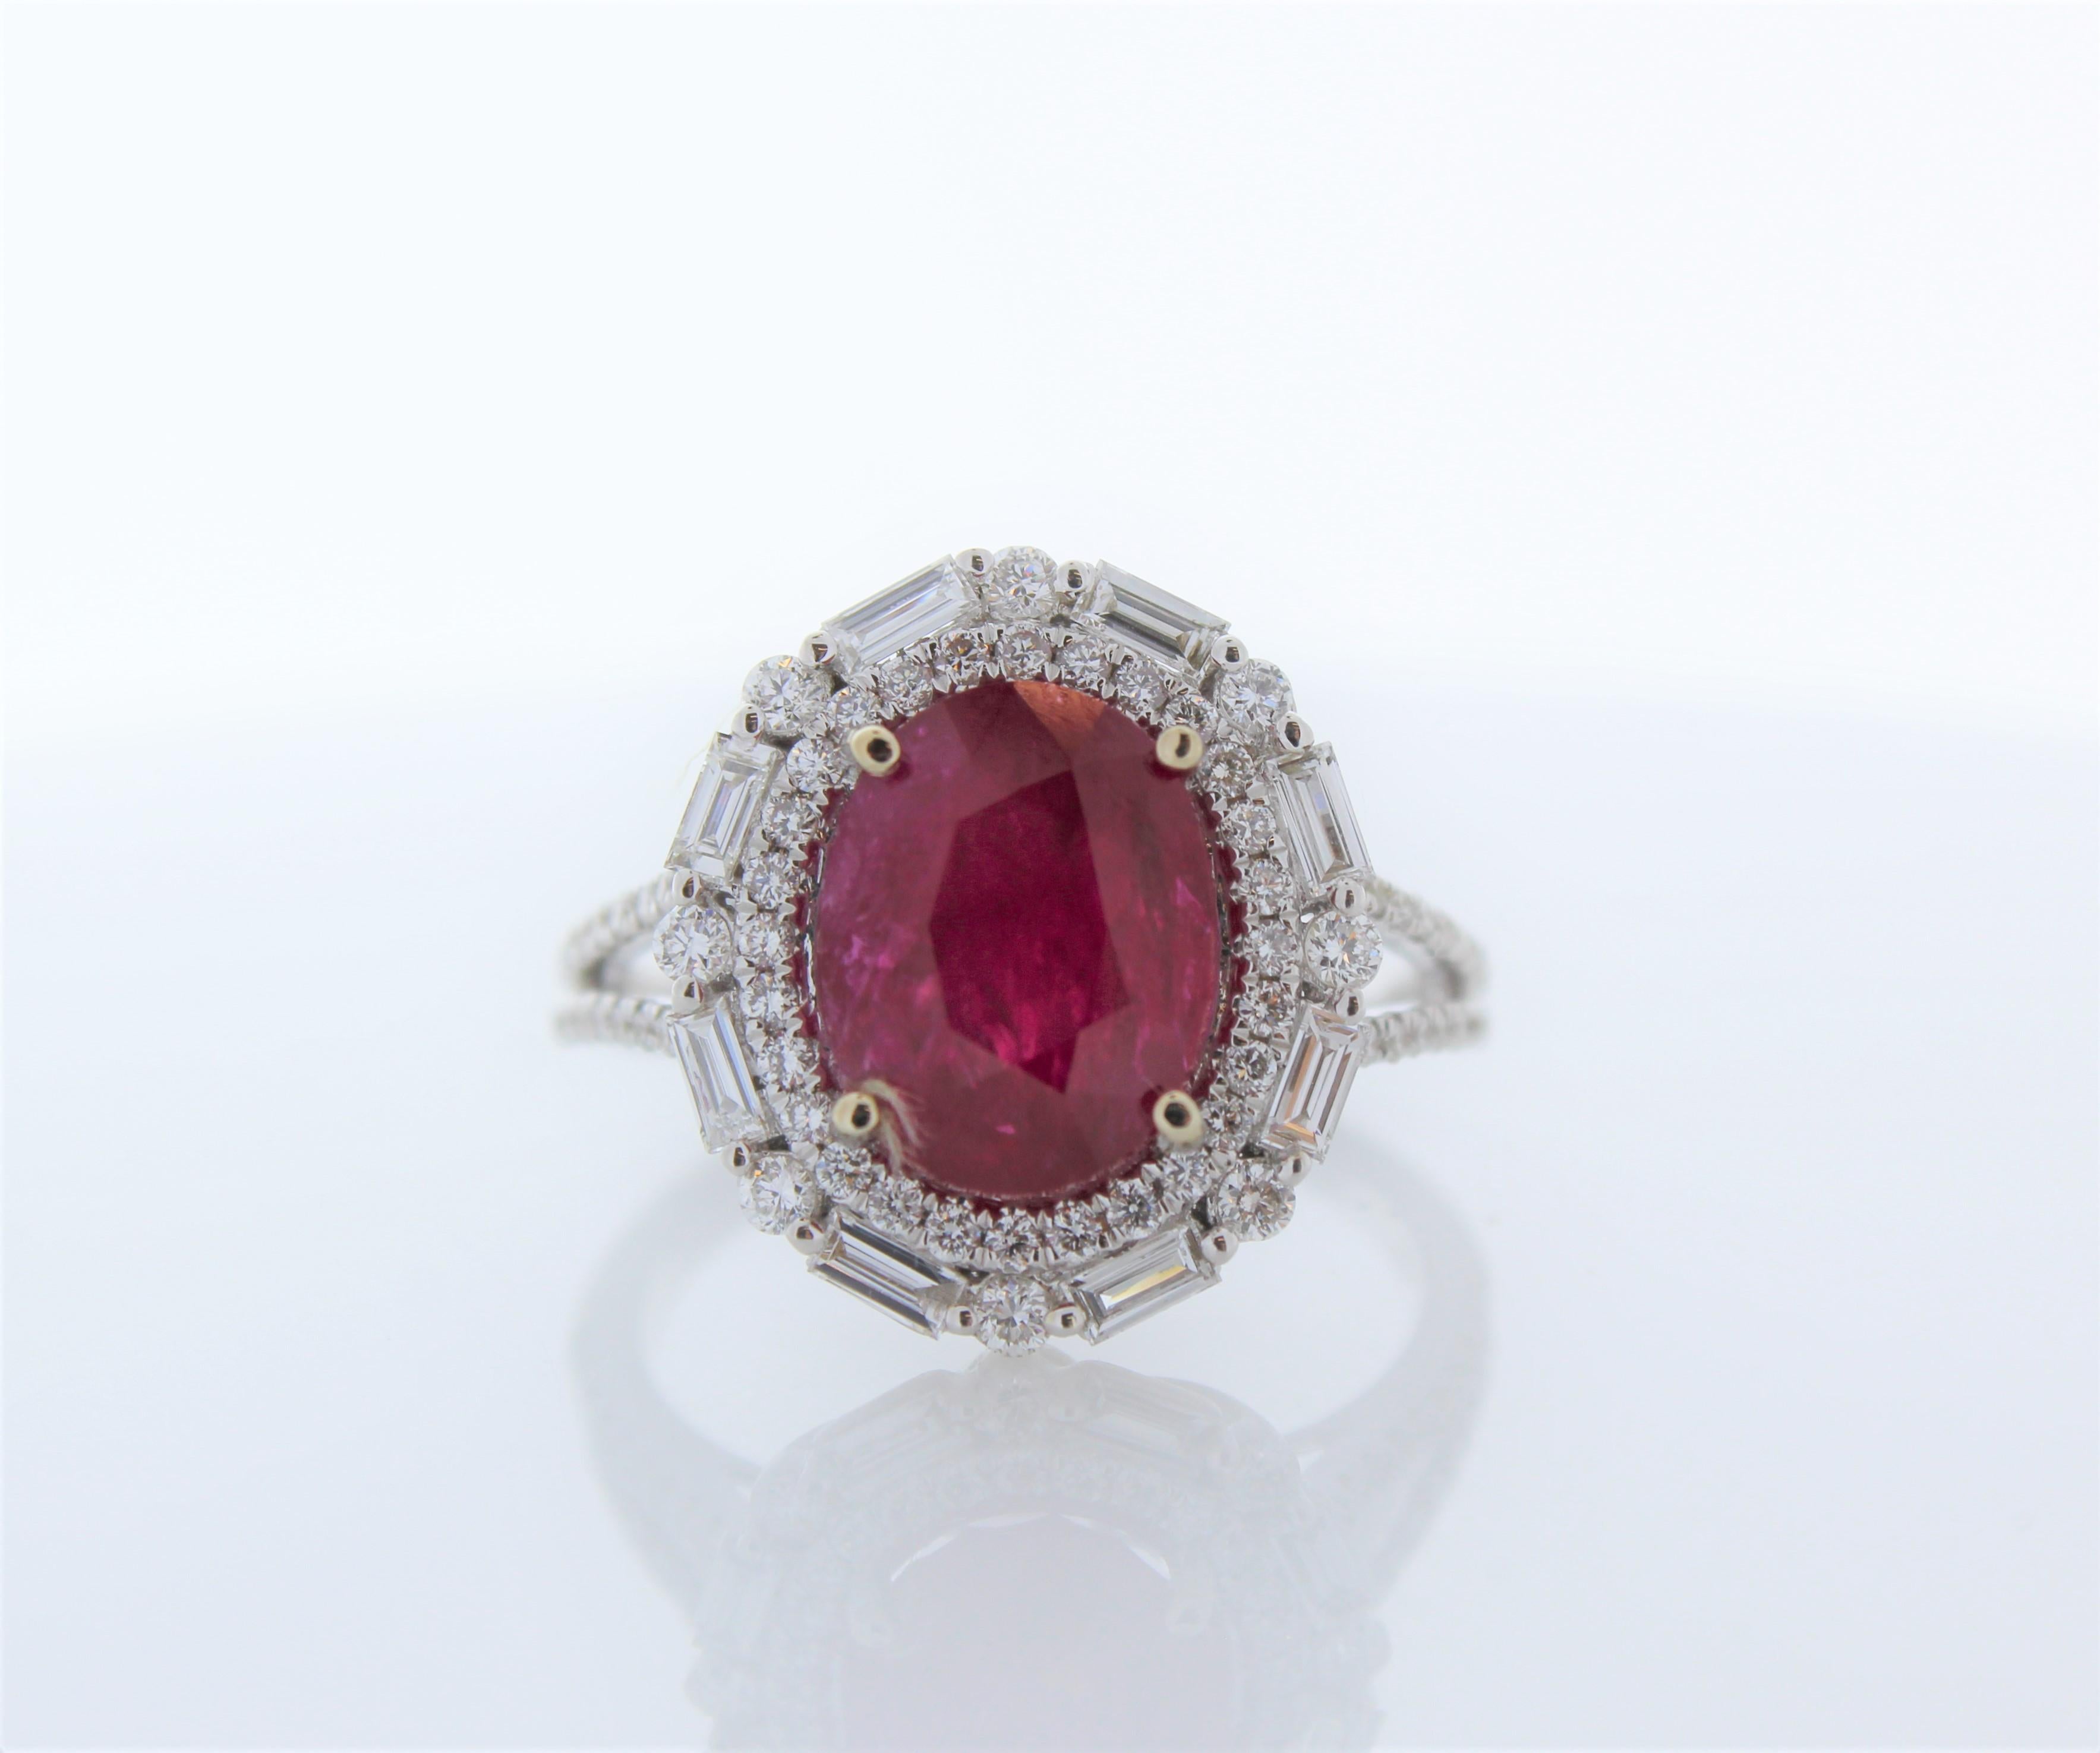 This is a cocktail ring featuring a 4.97 red ruby. The gem source is Myanmar. Its color is blood red with no modifier colors. Its transparency and luster are superb. The vibrant red is complemented by a dazzling display of marquise cut diamonds,